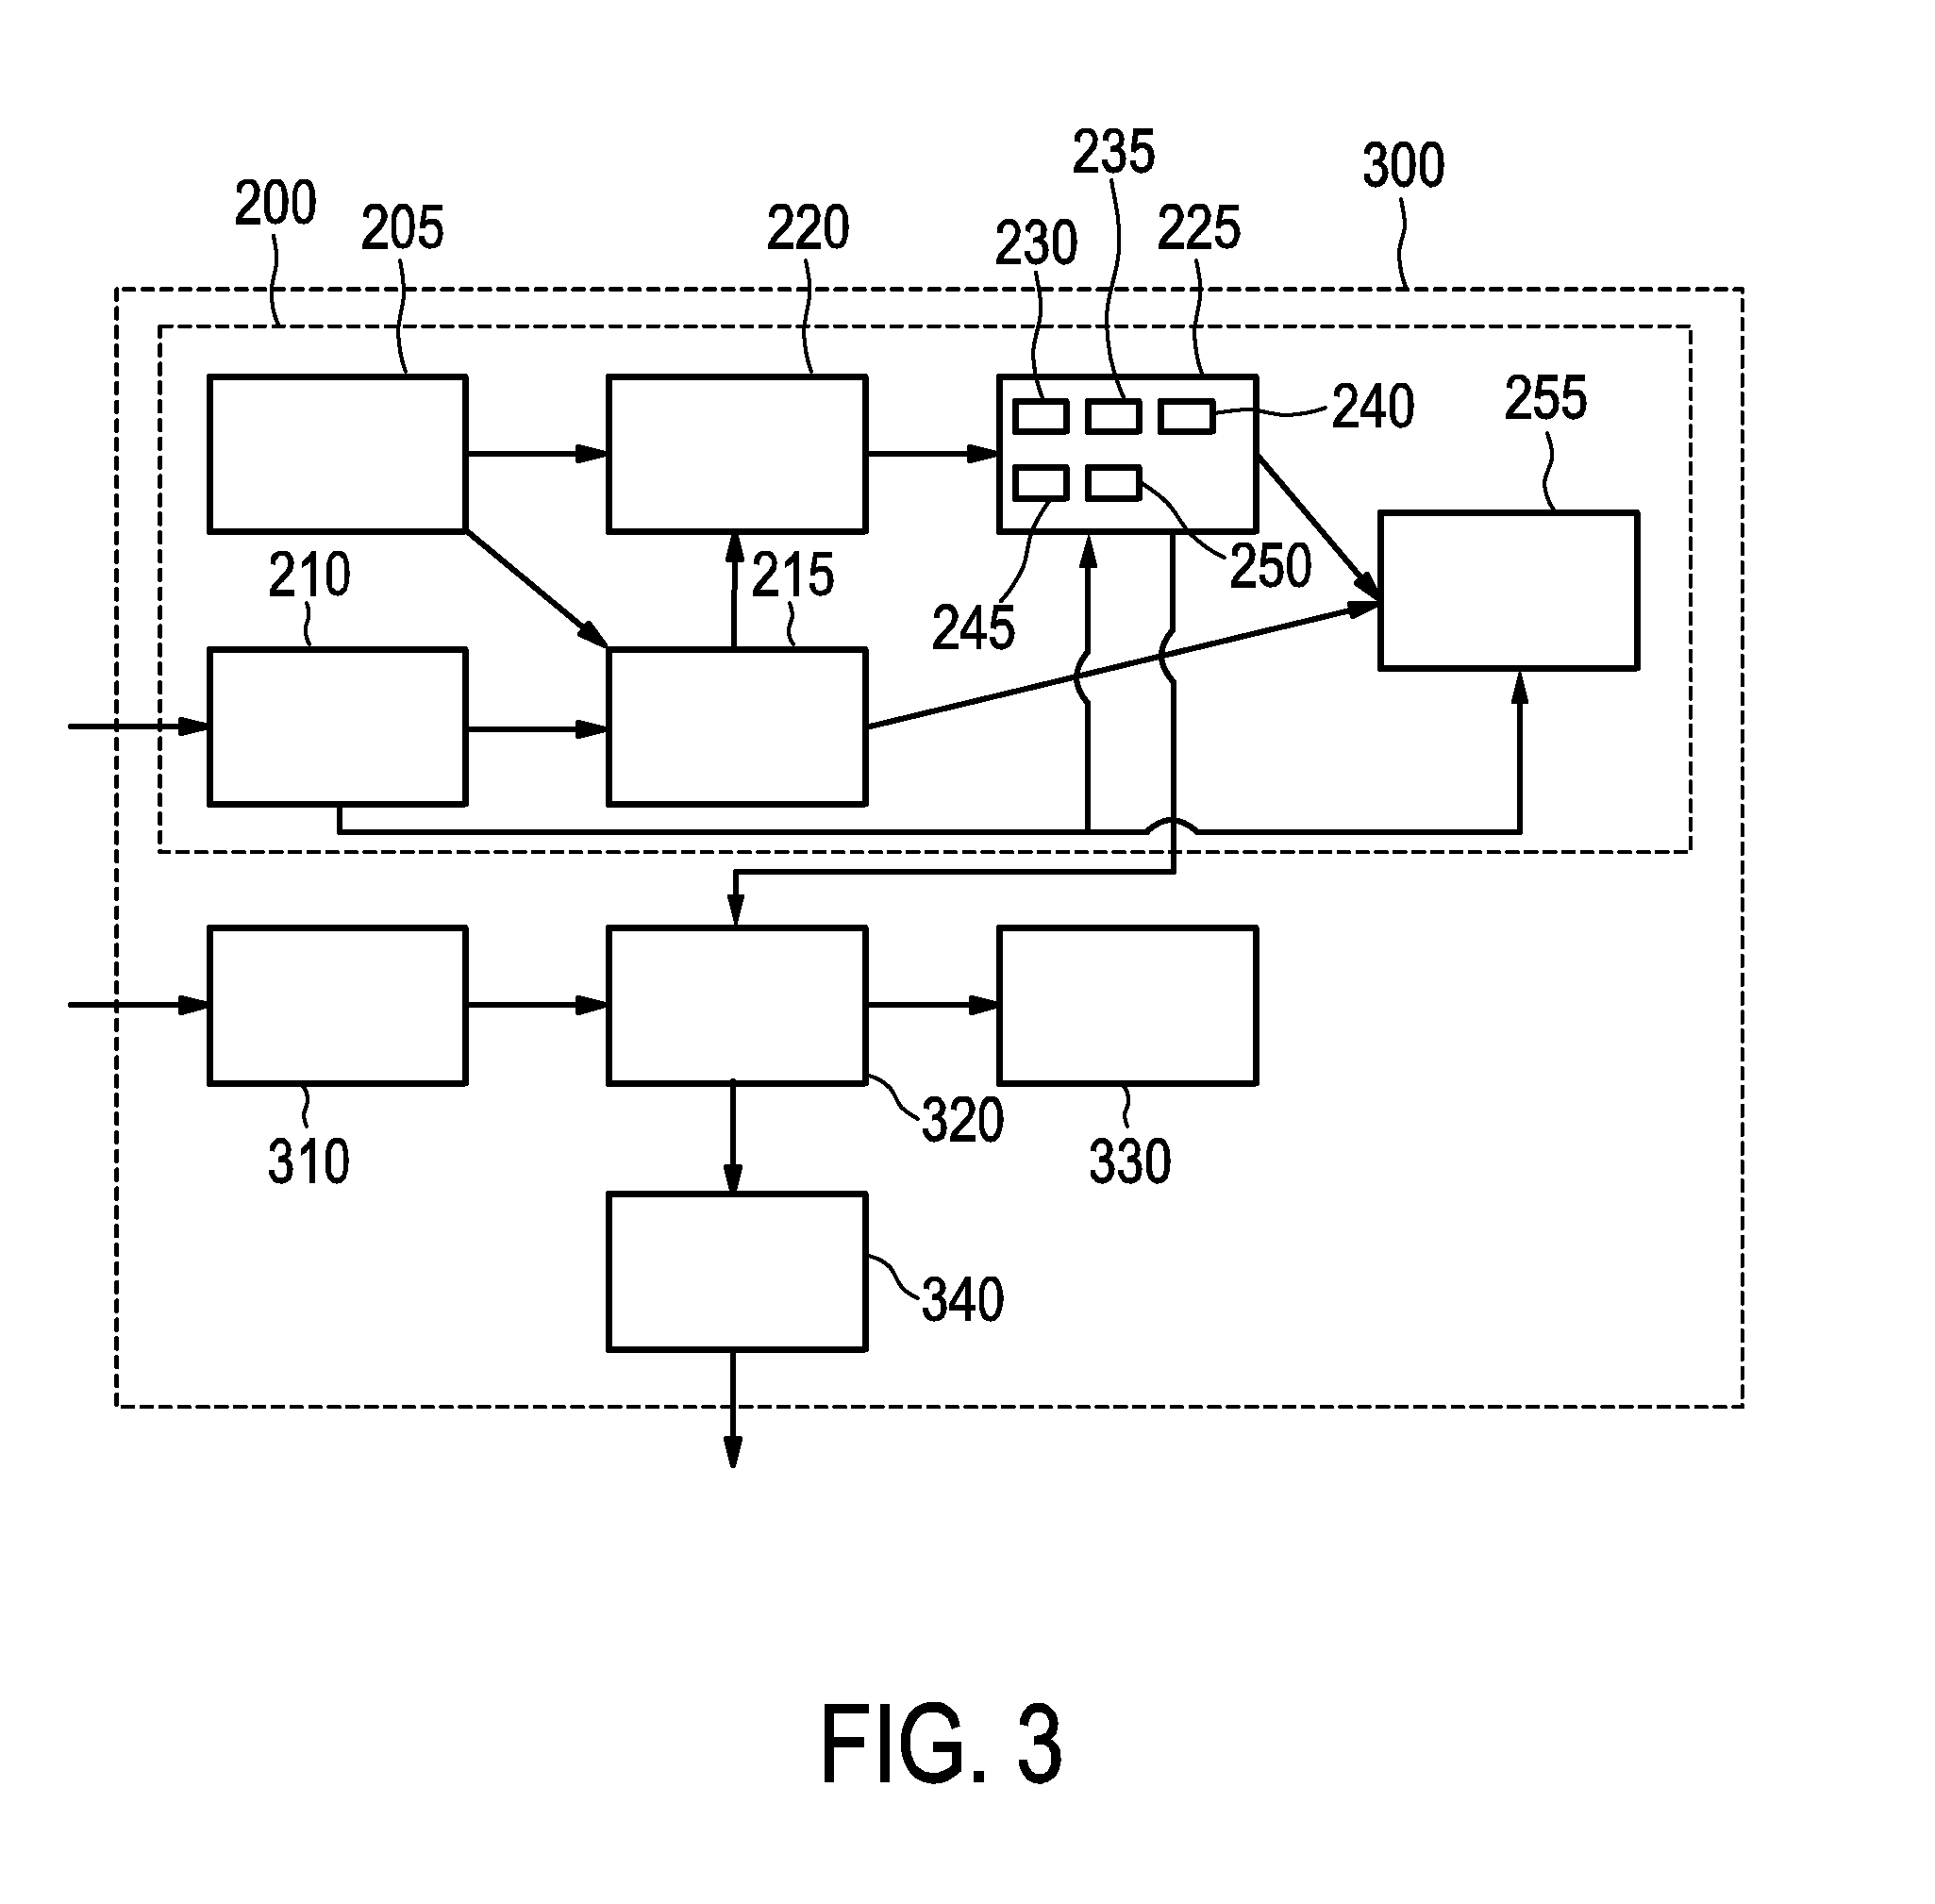 Apparatus and method for visualizing a conduction tract of heart